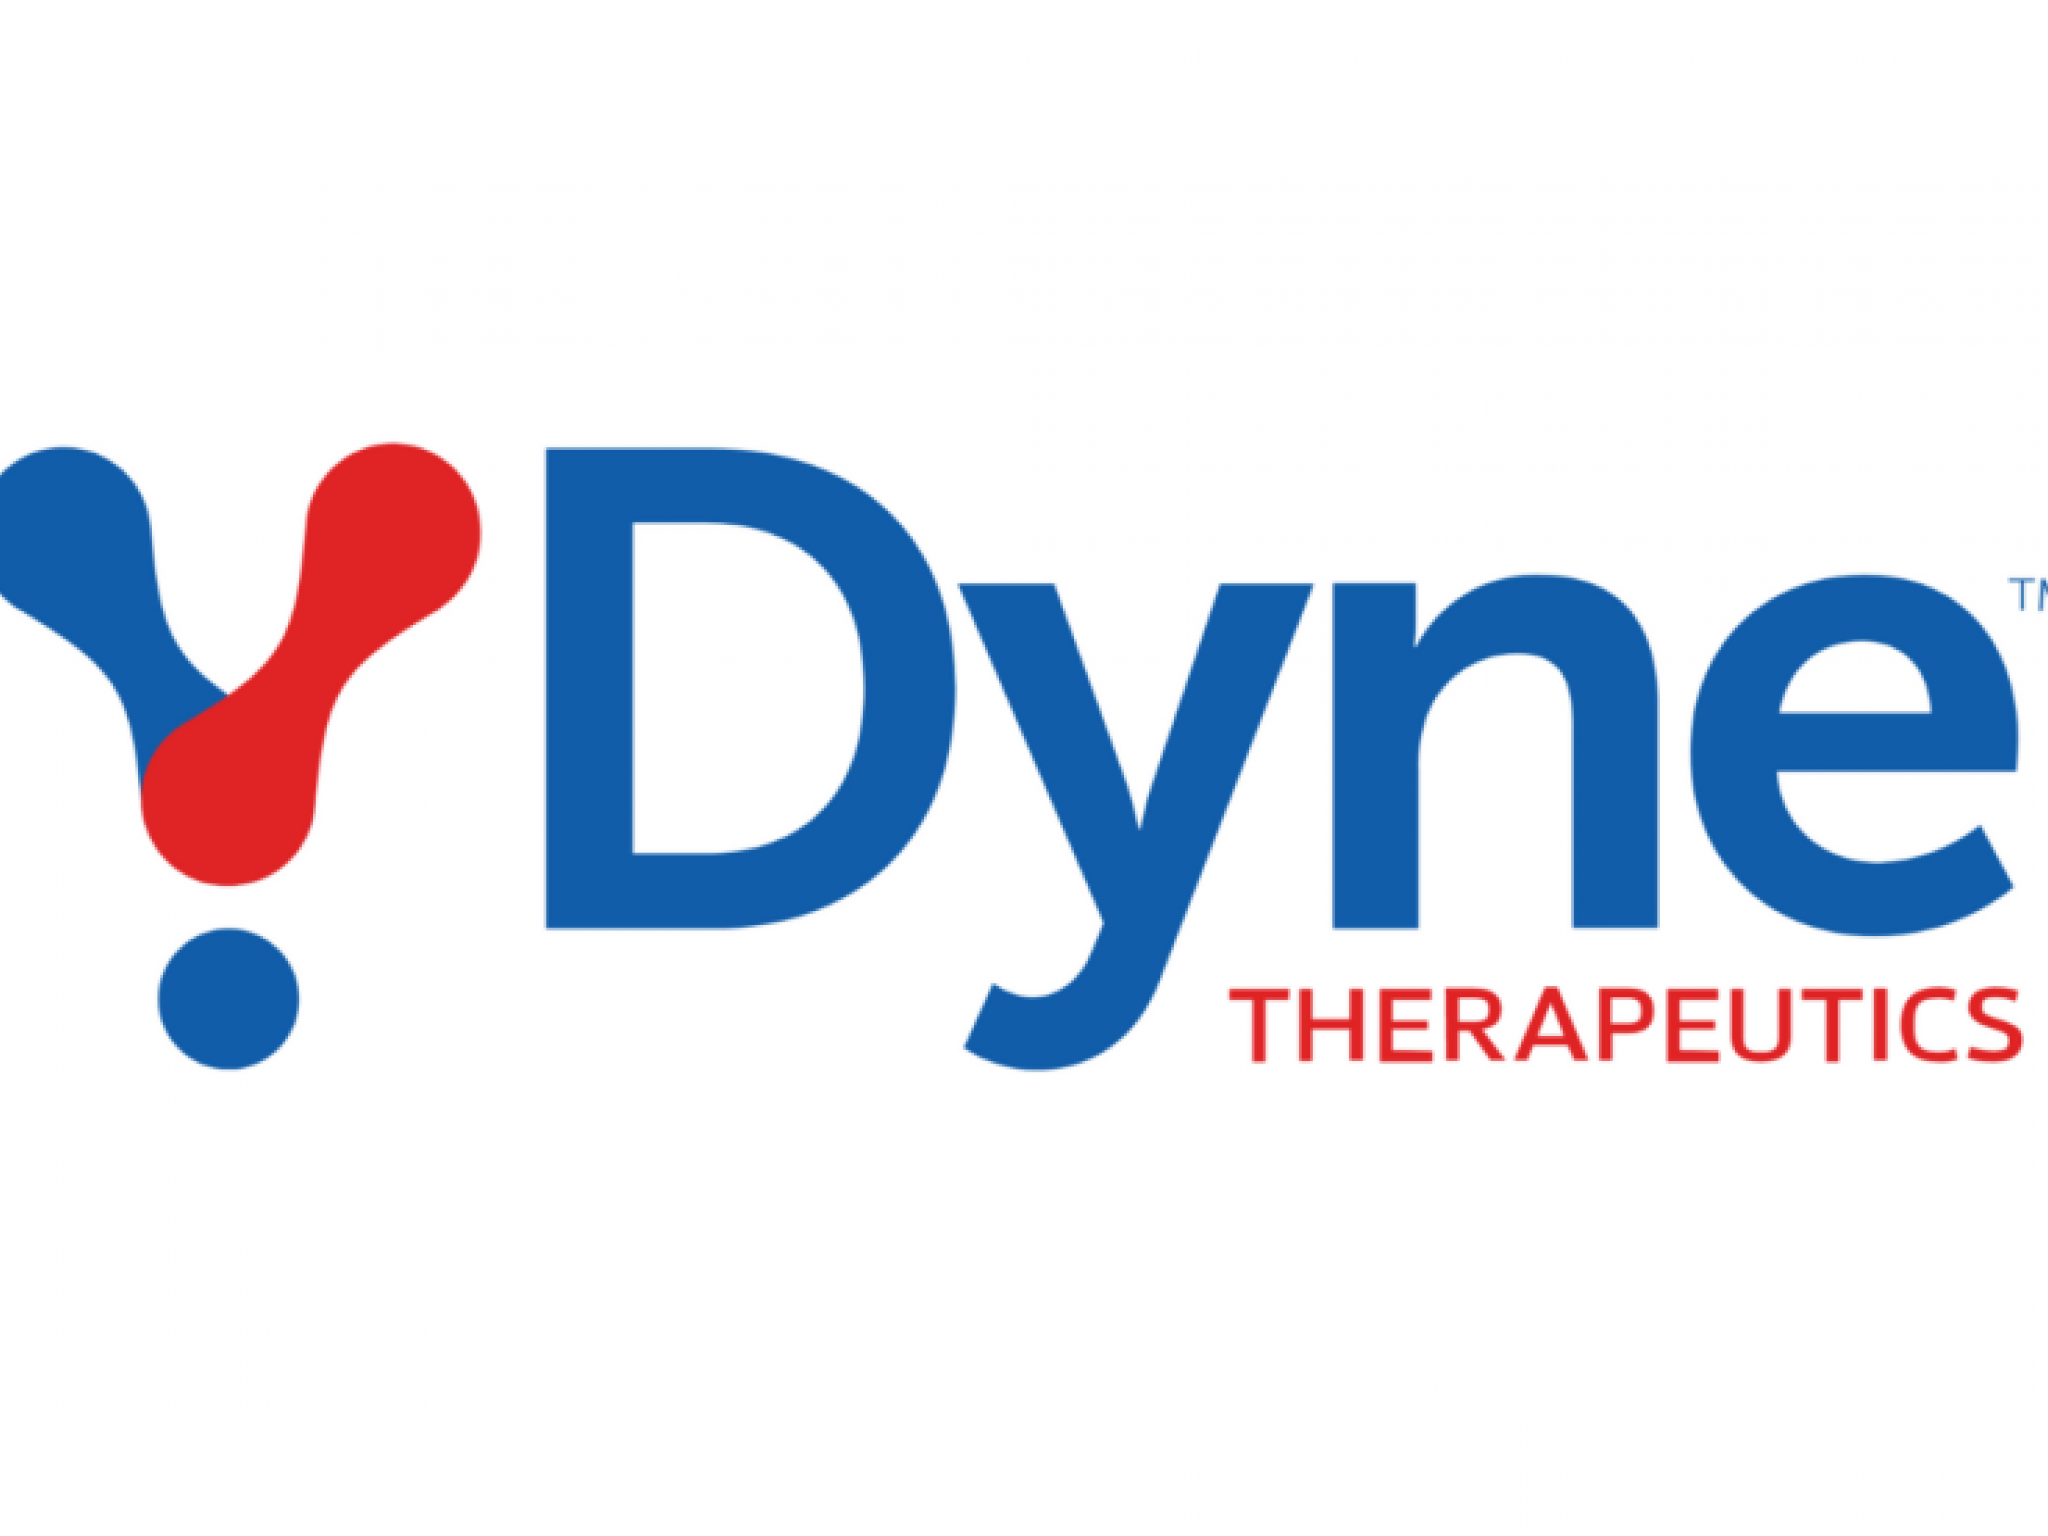  why-is-dyne-therapeutics-stock-soaring-on-monday 